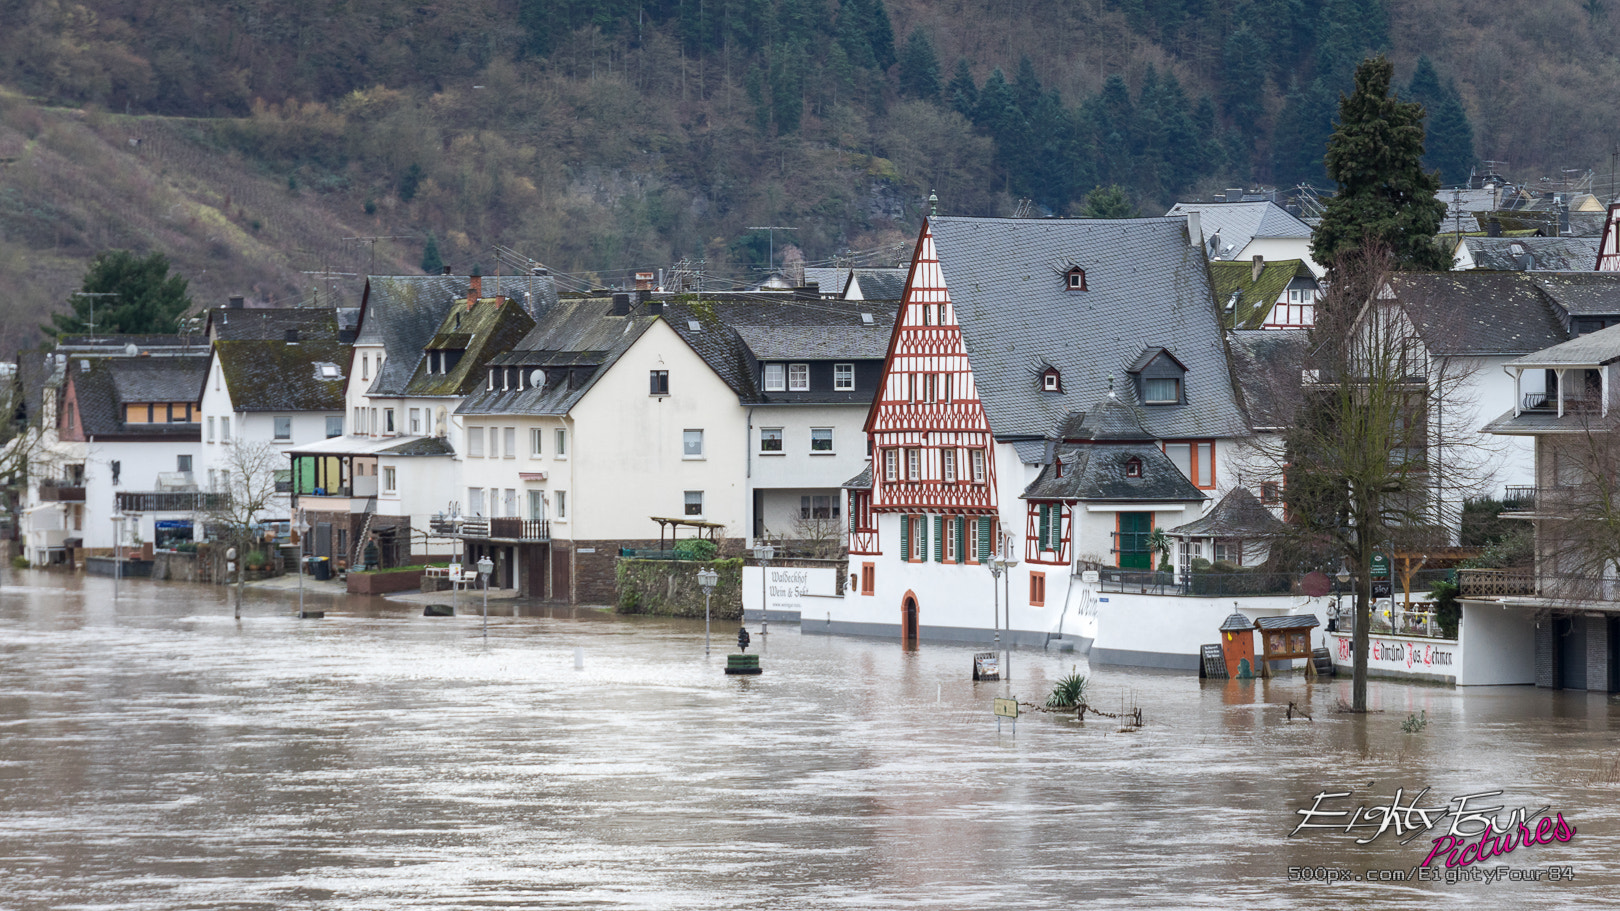 Sony a7 + Tamron SP 70-200mm F2.8 Di VC USD sample photo. Zell-kaimt flooded photography